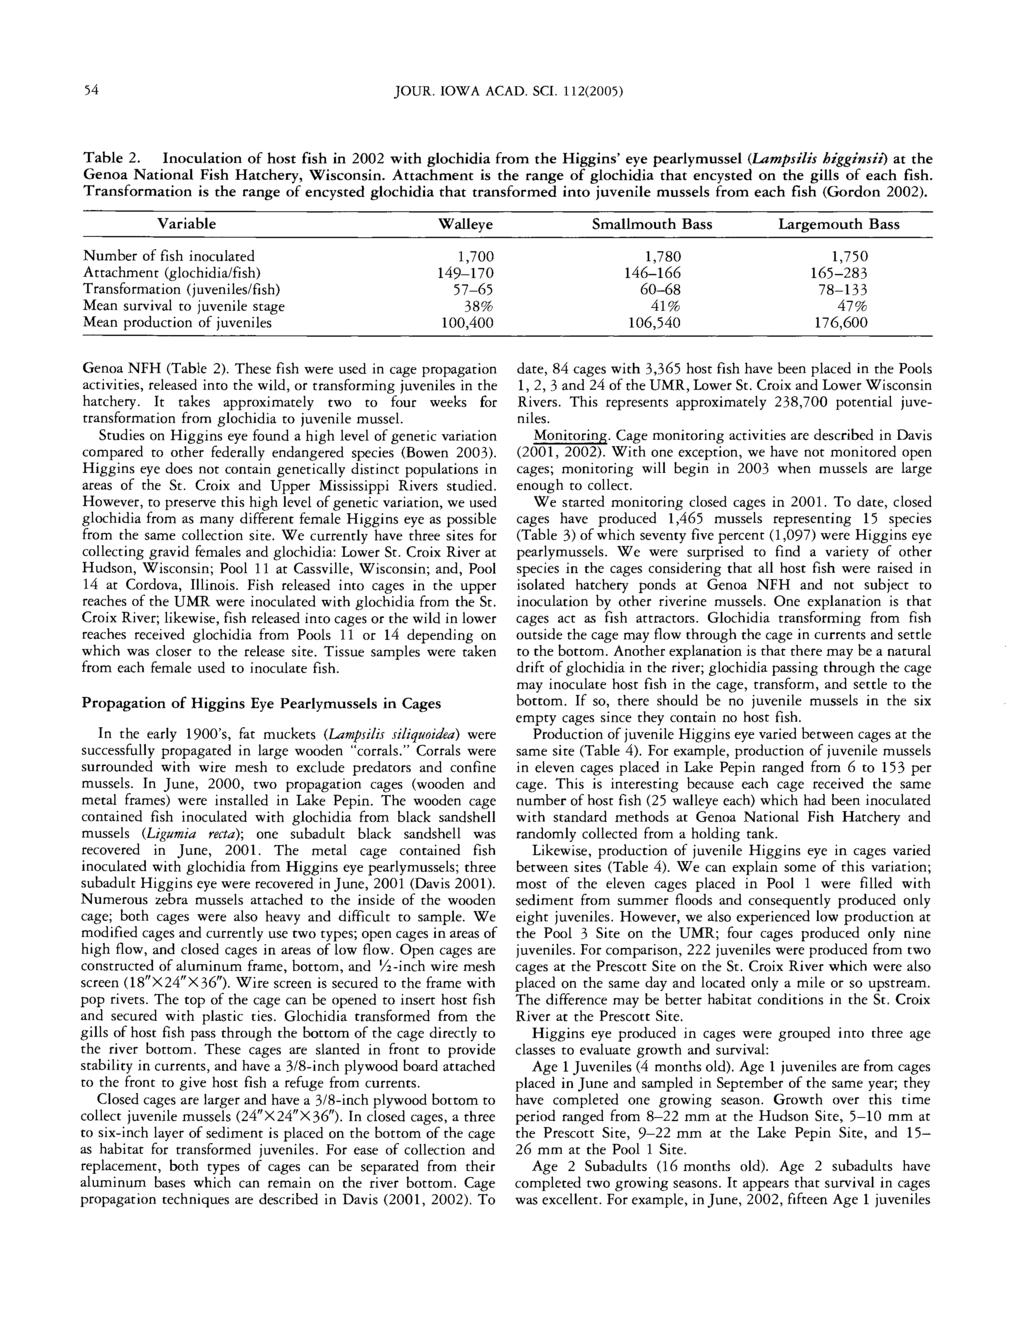 54 JOUR. IOWA ACAD. SCI. 112(2005) Table 2. Inoculation of host fish in 2002 with glochidia from the Higgins' eye pearlymussel (Lampsilis higginsit) at the Genoa National Fish Hatchery, Wisconsin.